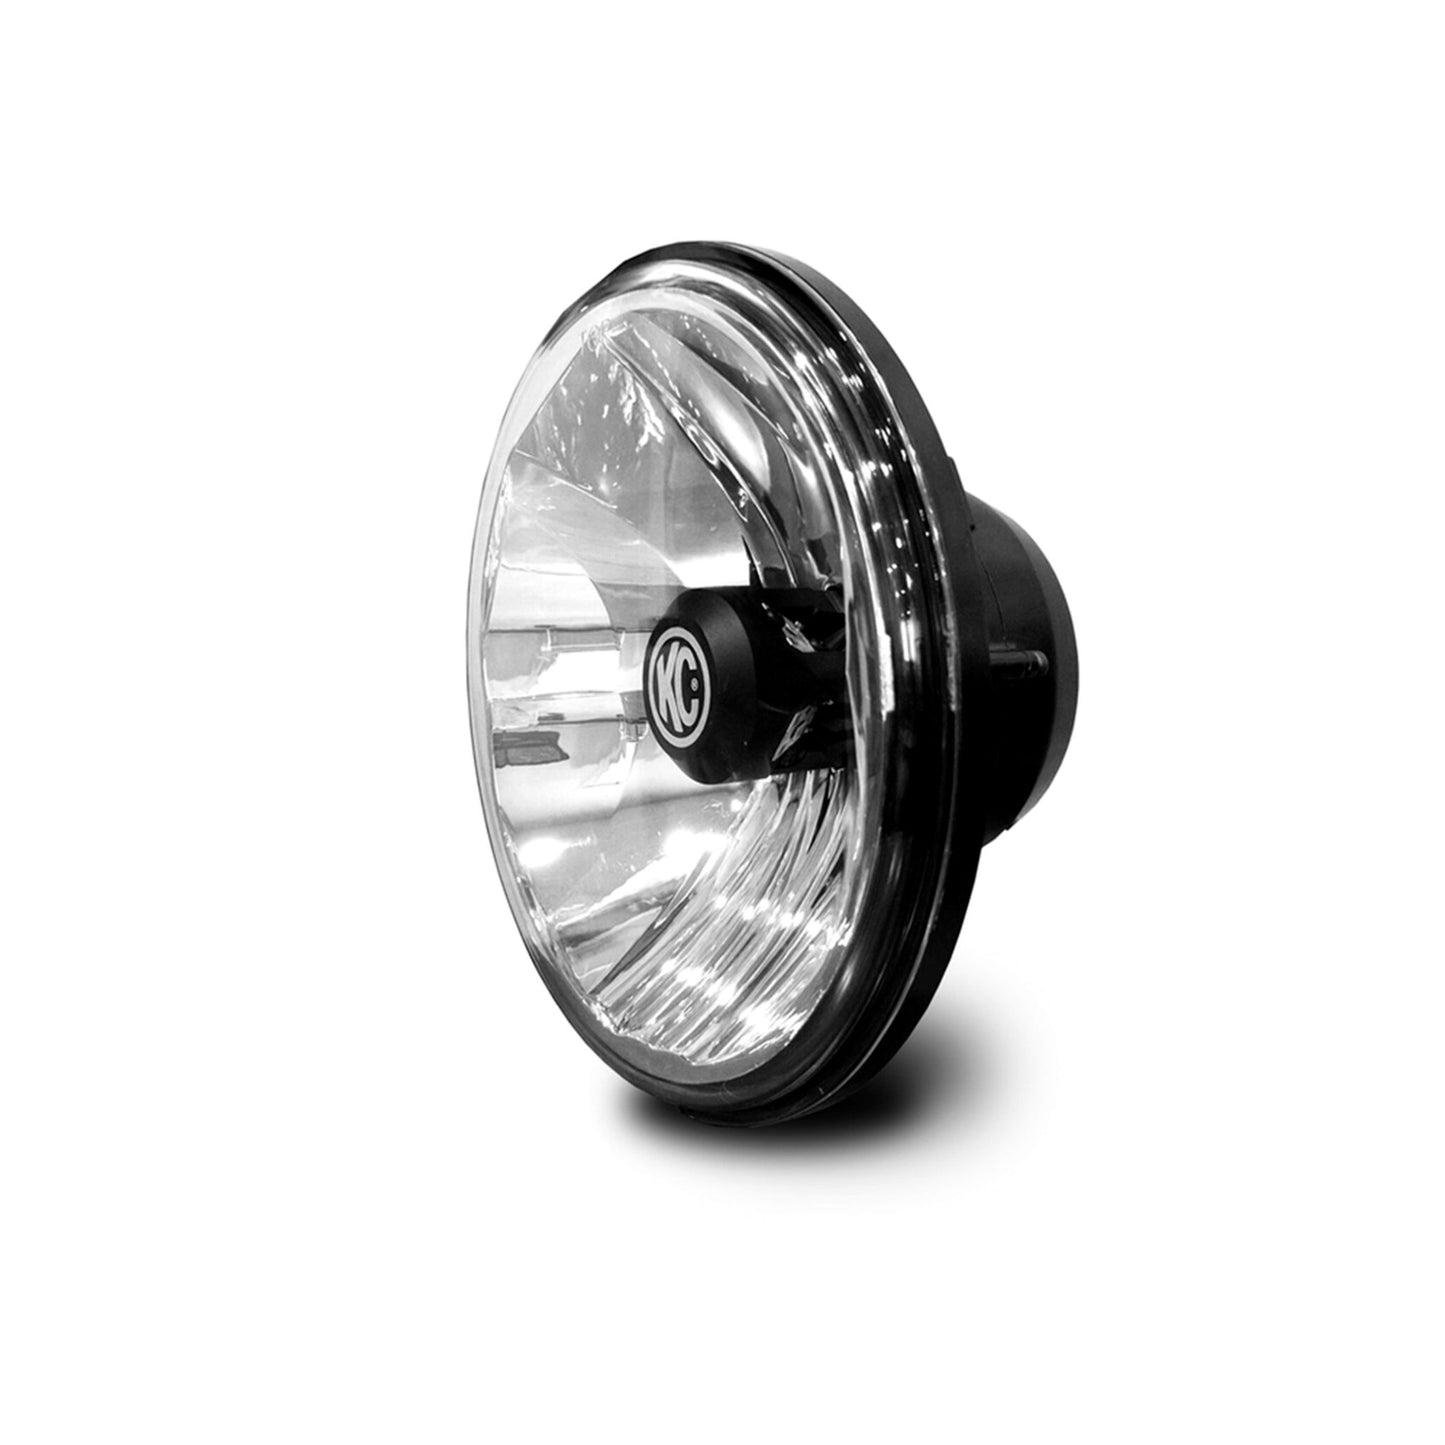 KC HiLiTES 7 in Gravity LED - 2-Headlights - 40W Driving Beam - Universal / fits 97-06 Jeep TJ 42361